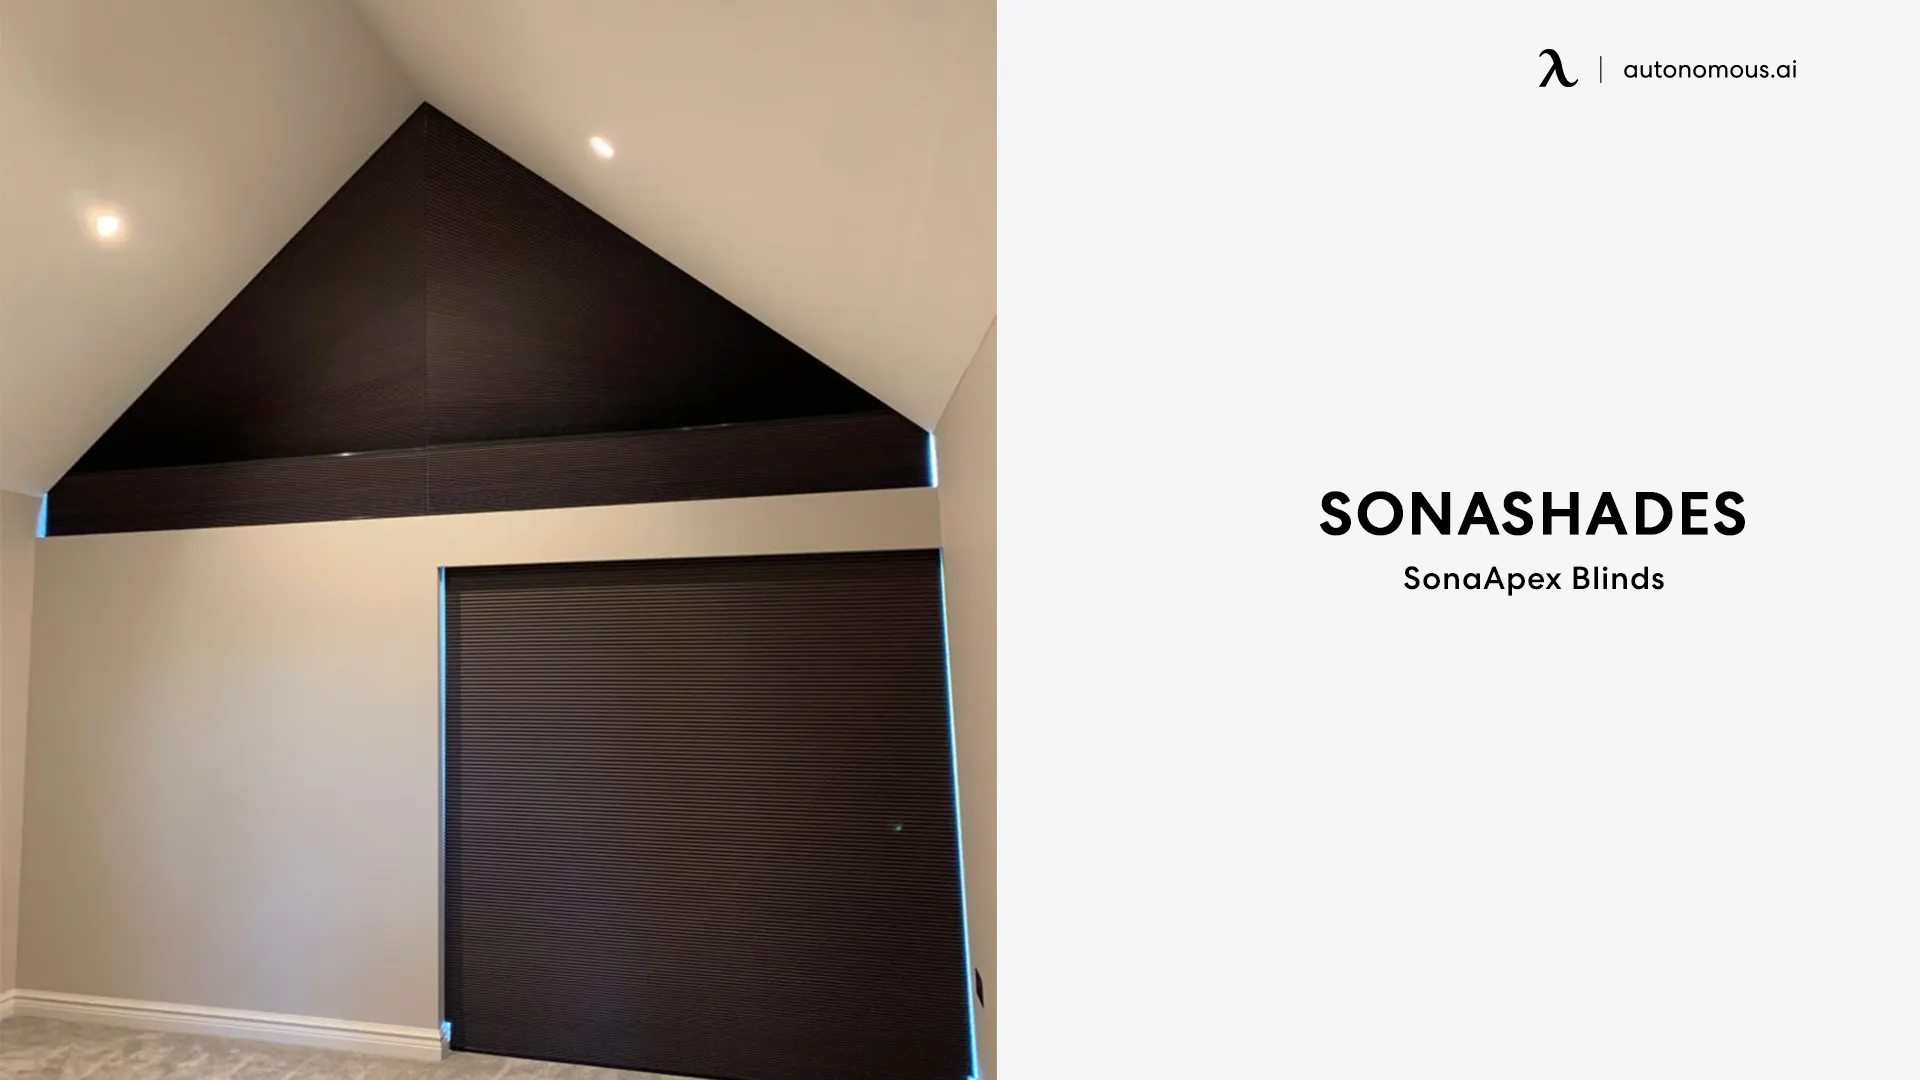 SonaShades' SonaApex electric blinds for windows